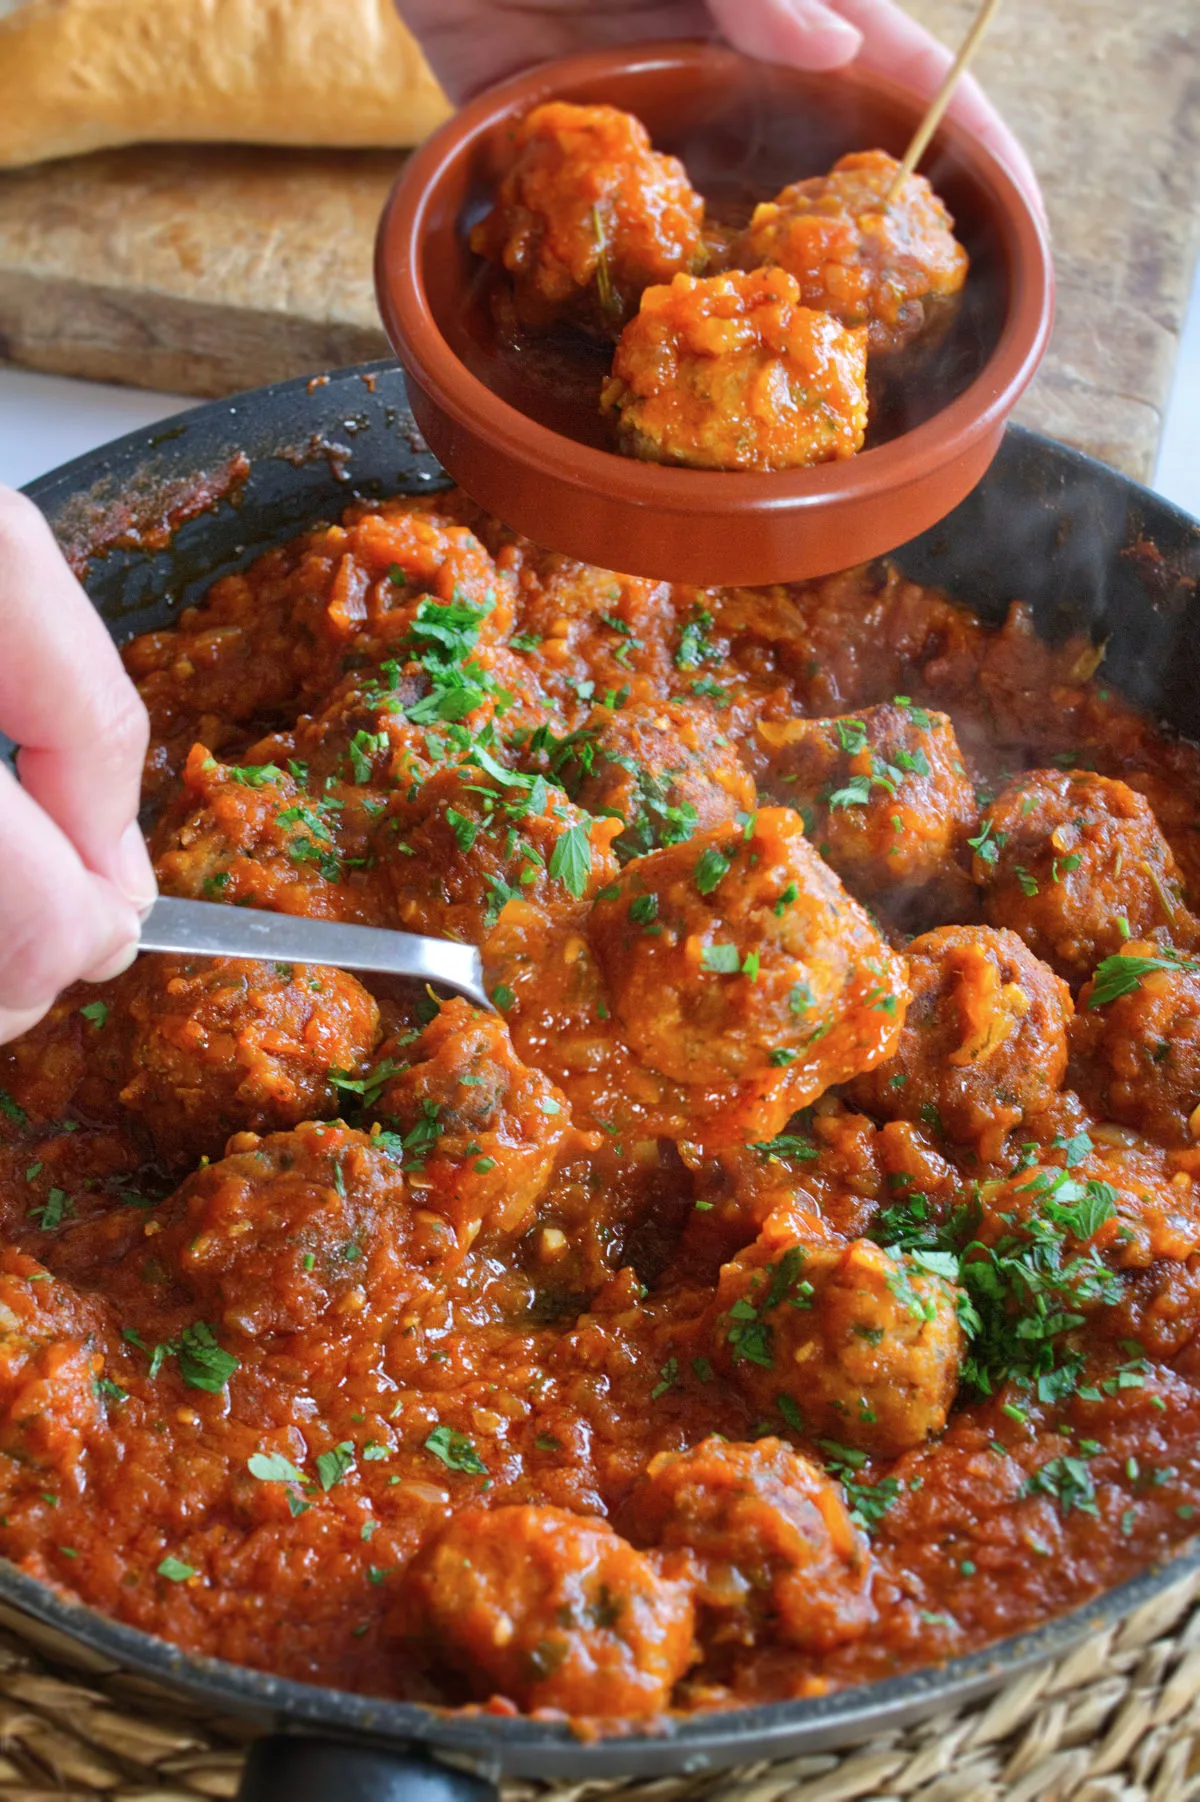 Spanish meatballs are served into a small bowl.